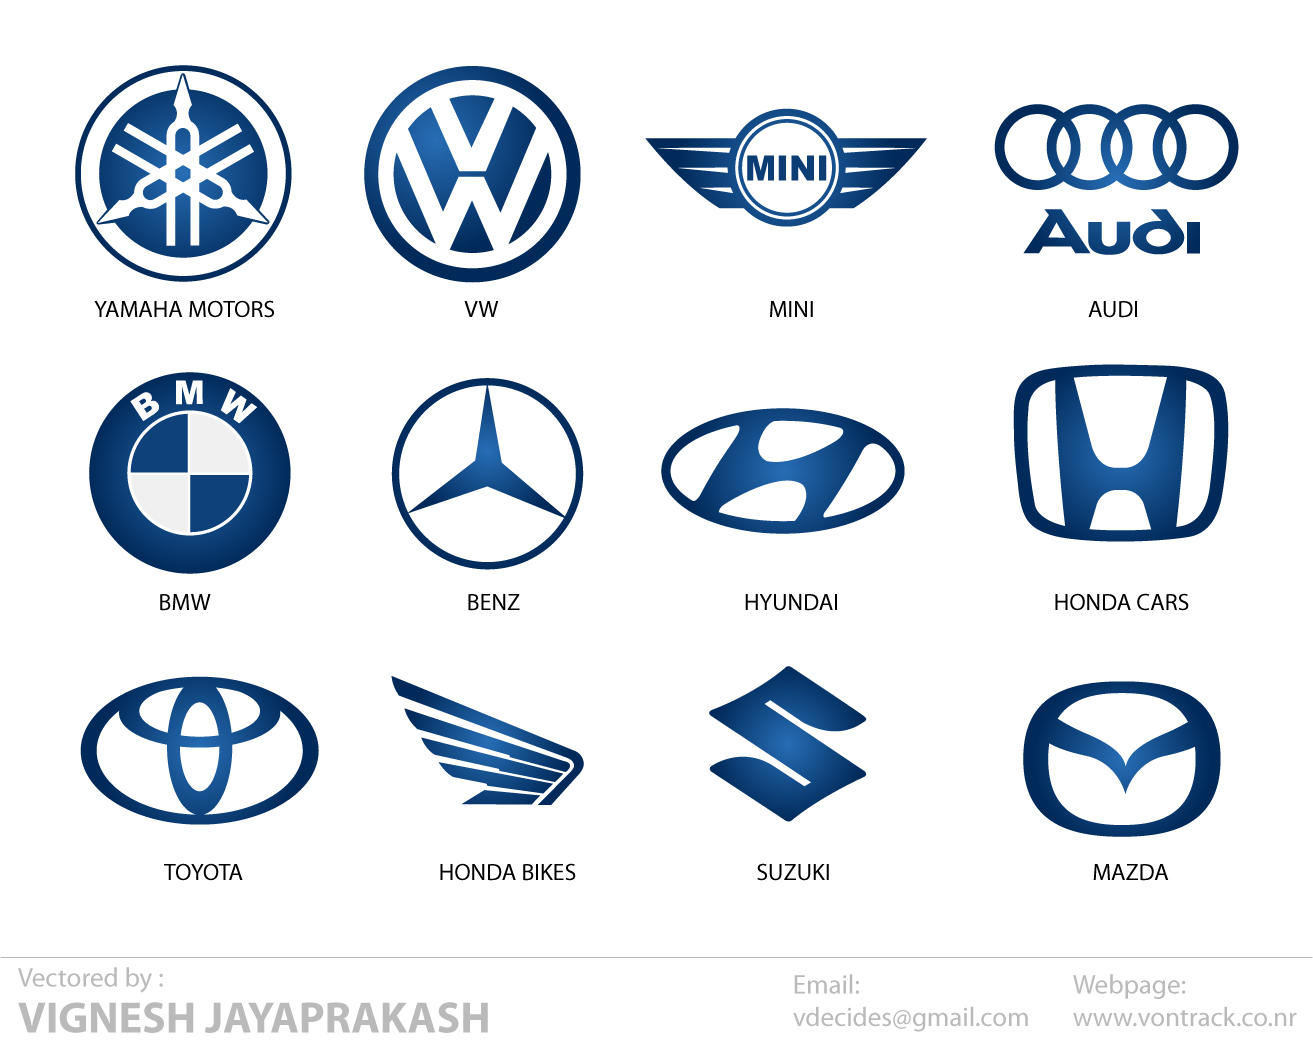 Automotive_Logos_by_vdecides.jpg